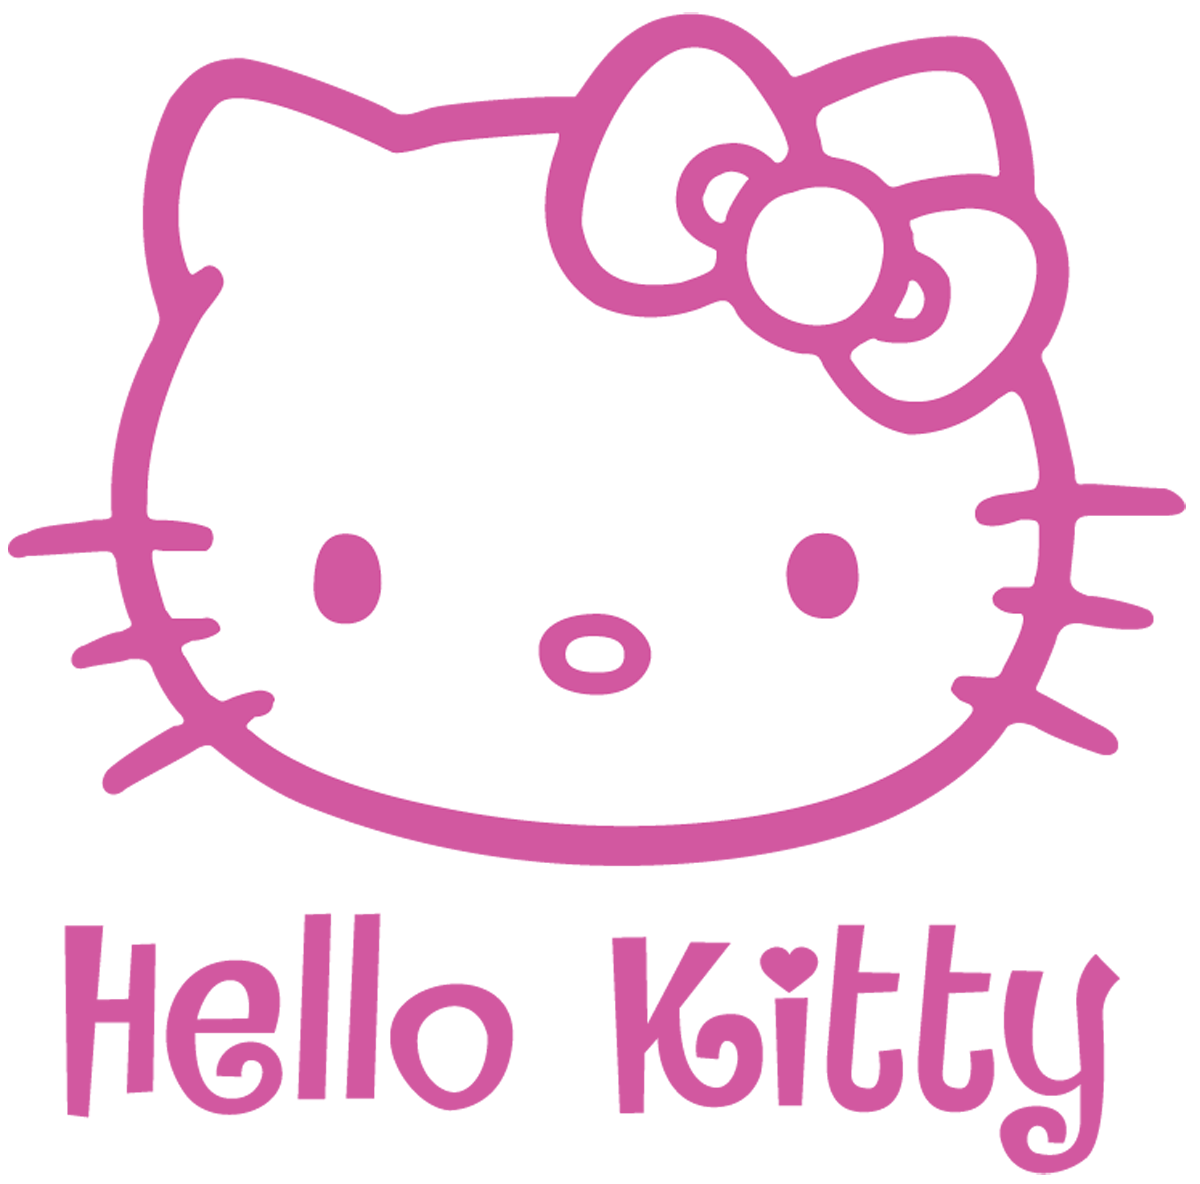 Telephone clipart hello. Black kitty wallpapers group